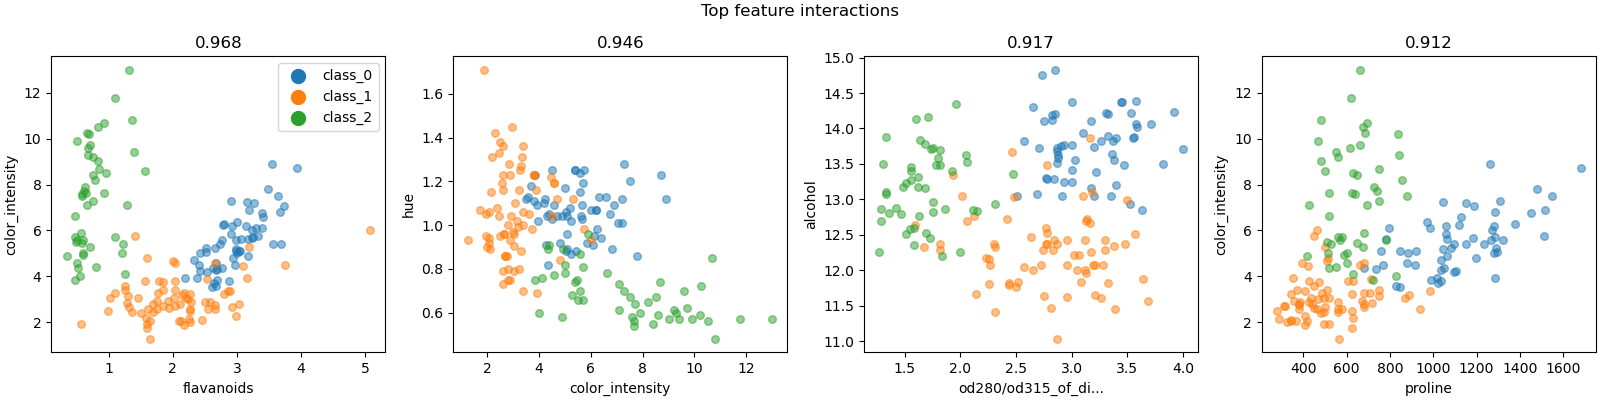 Top feature interactions, 0.968, 0.946, 0.917, 0.912